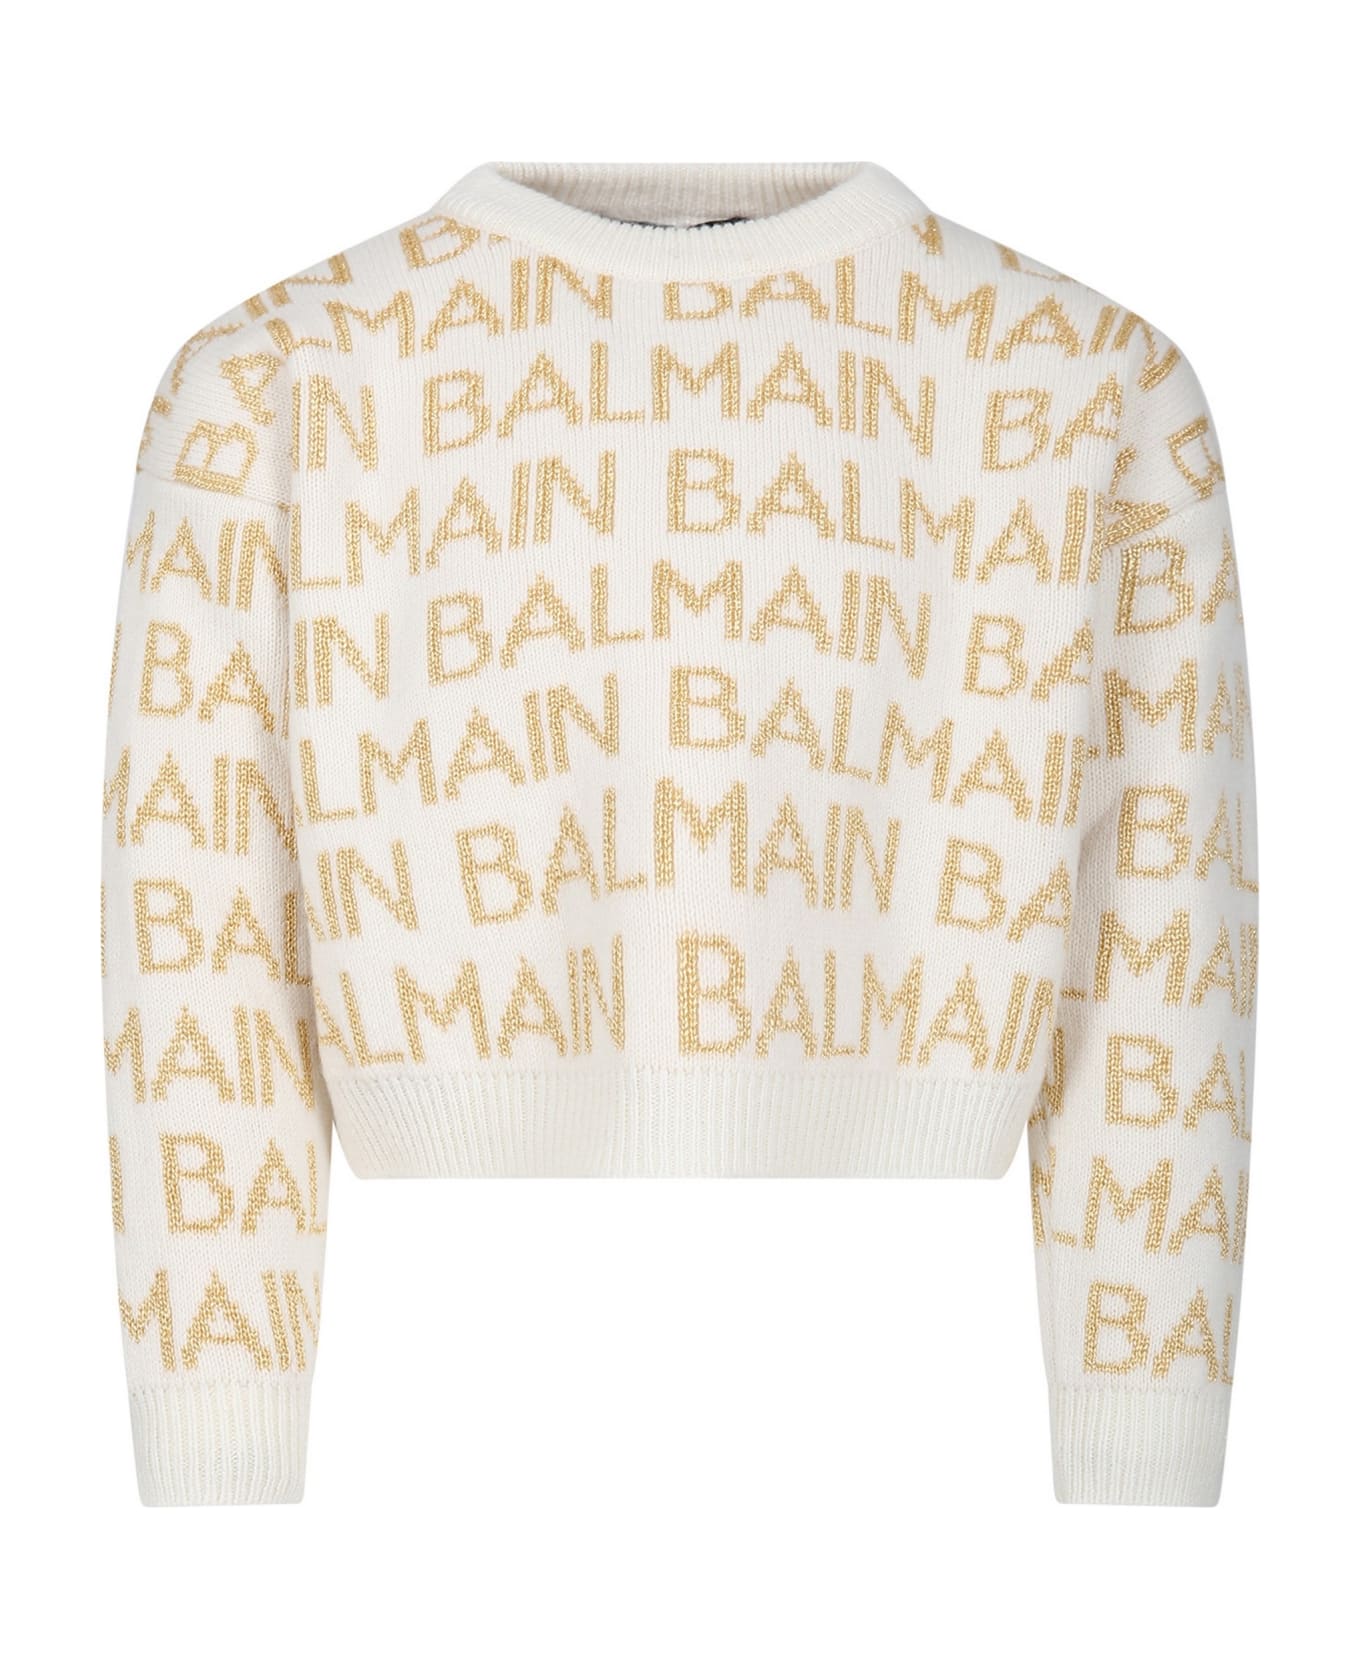 Balmain Ivory Sweater For Girl With Logo - Ivory